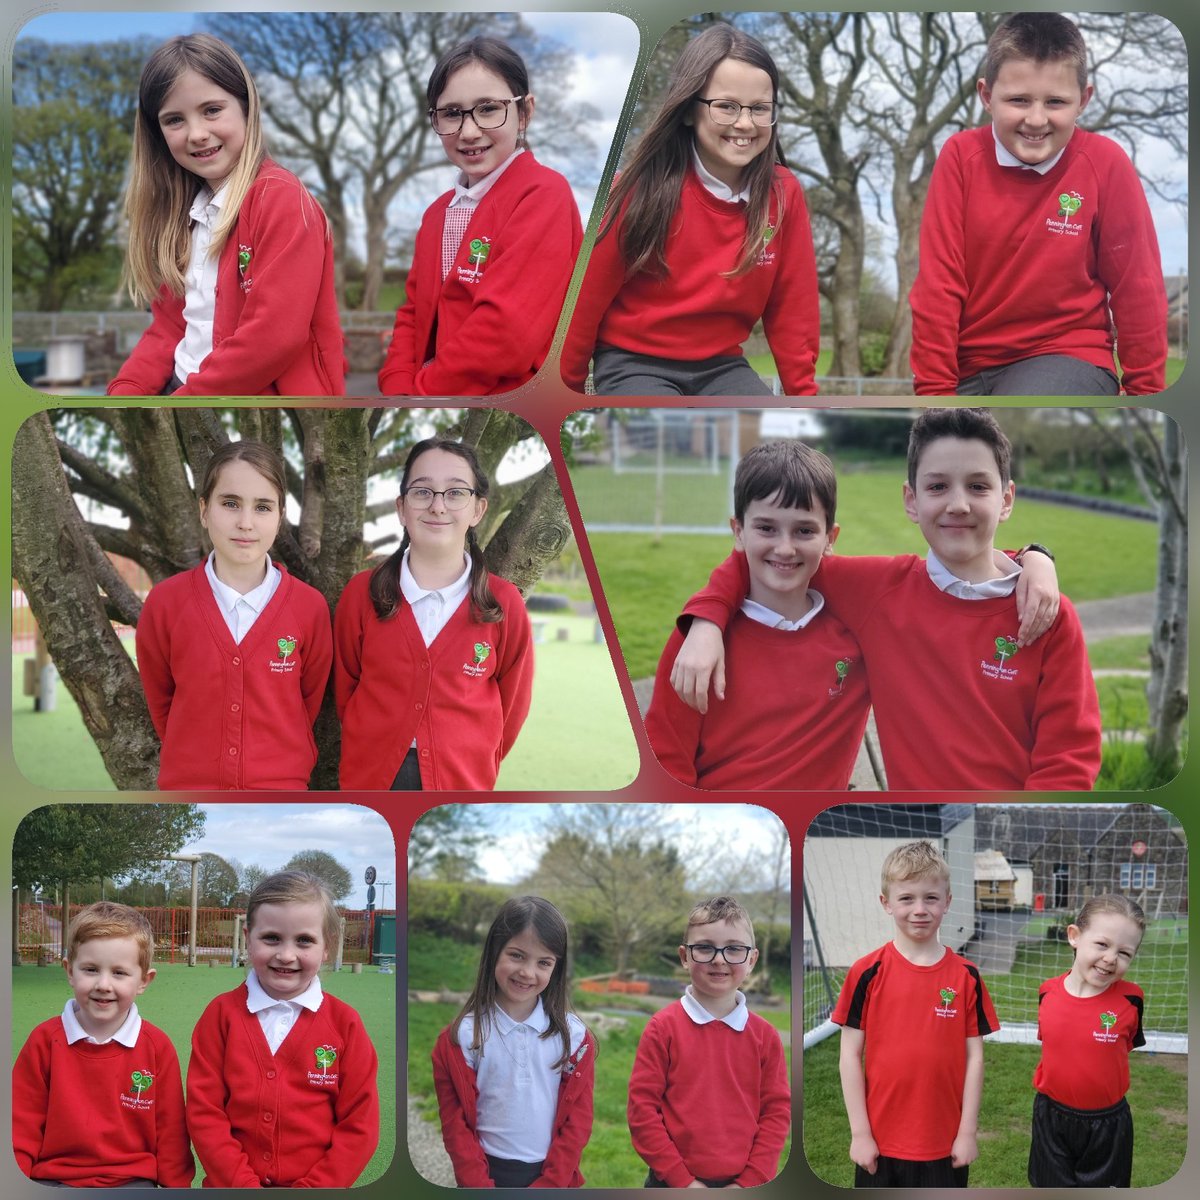 Say hello to our new school council members who were voted in by their classes, after working hard on their manifestos. We look forward to some of the exciting changes they hope to introduce to our school over the year! 👏👏😊 #schoolcouncil #manifesto #BritishValues